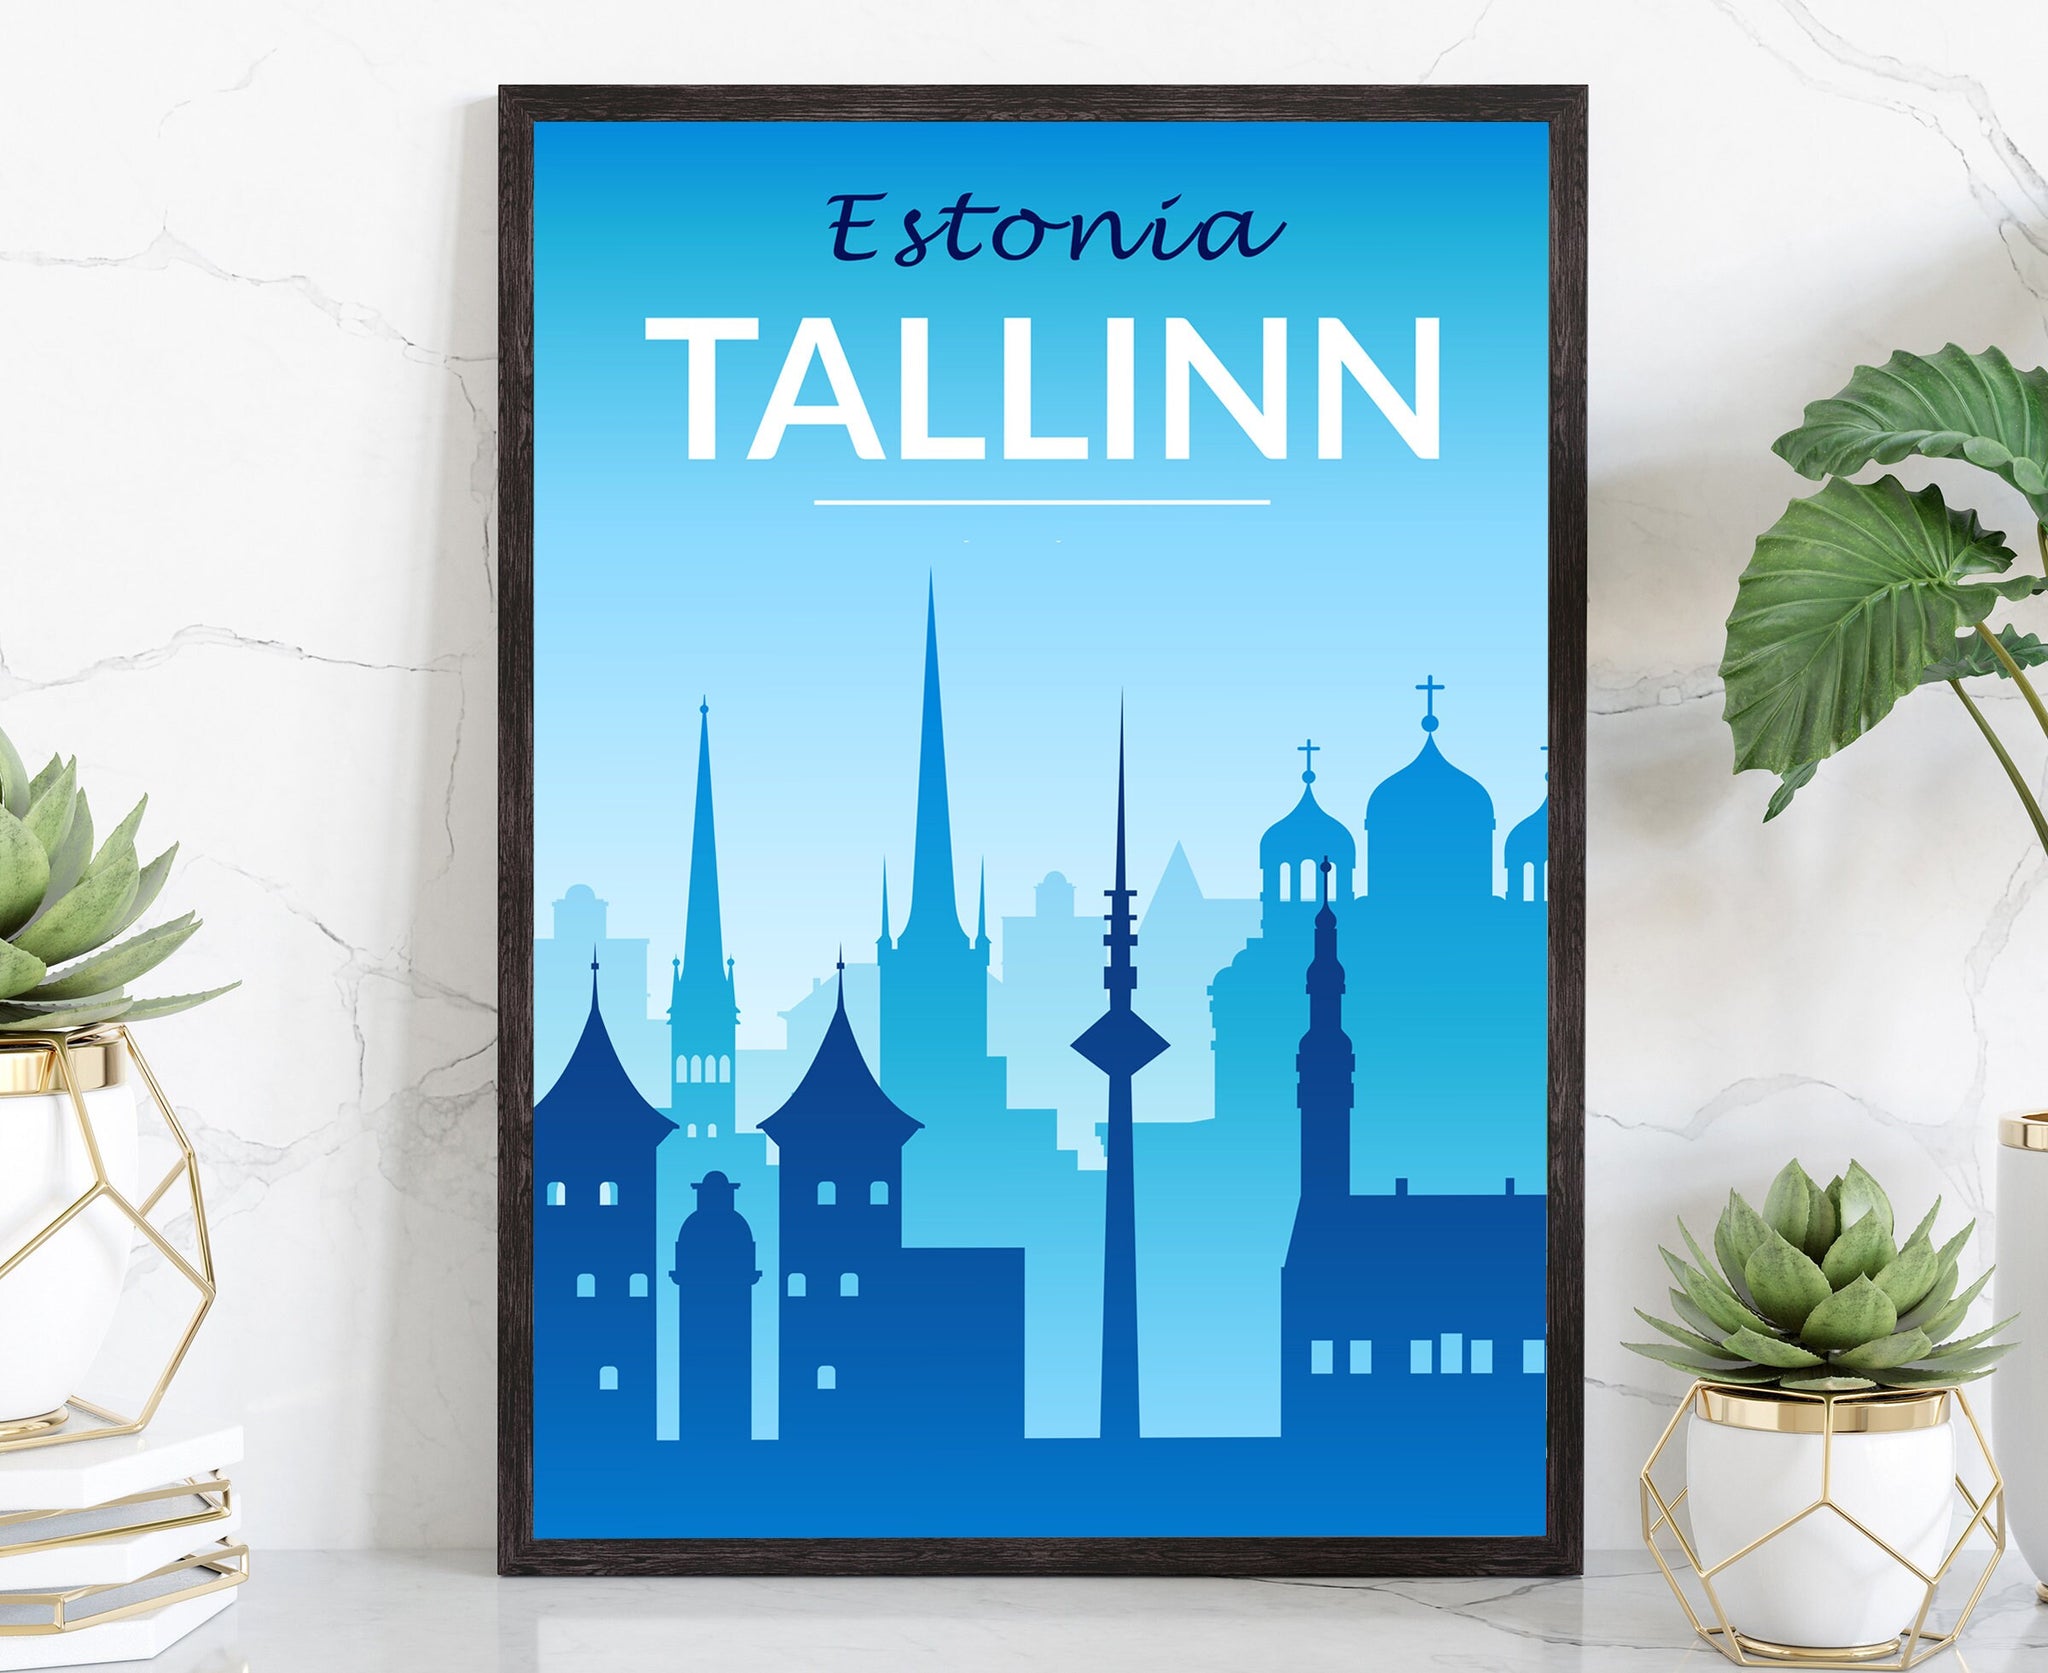 Retro Style Travel Poster, Estonia Vintage Rustic Poster Print, Home Wall Art, Office Wall Decors, Posters, Tallinn, City Map Poster Prints